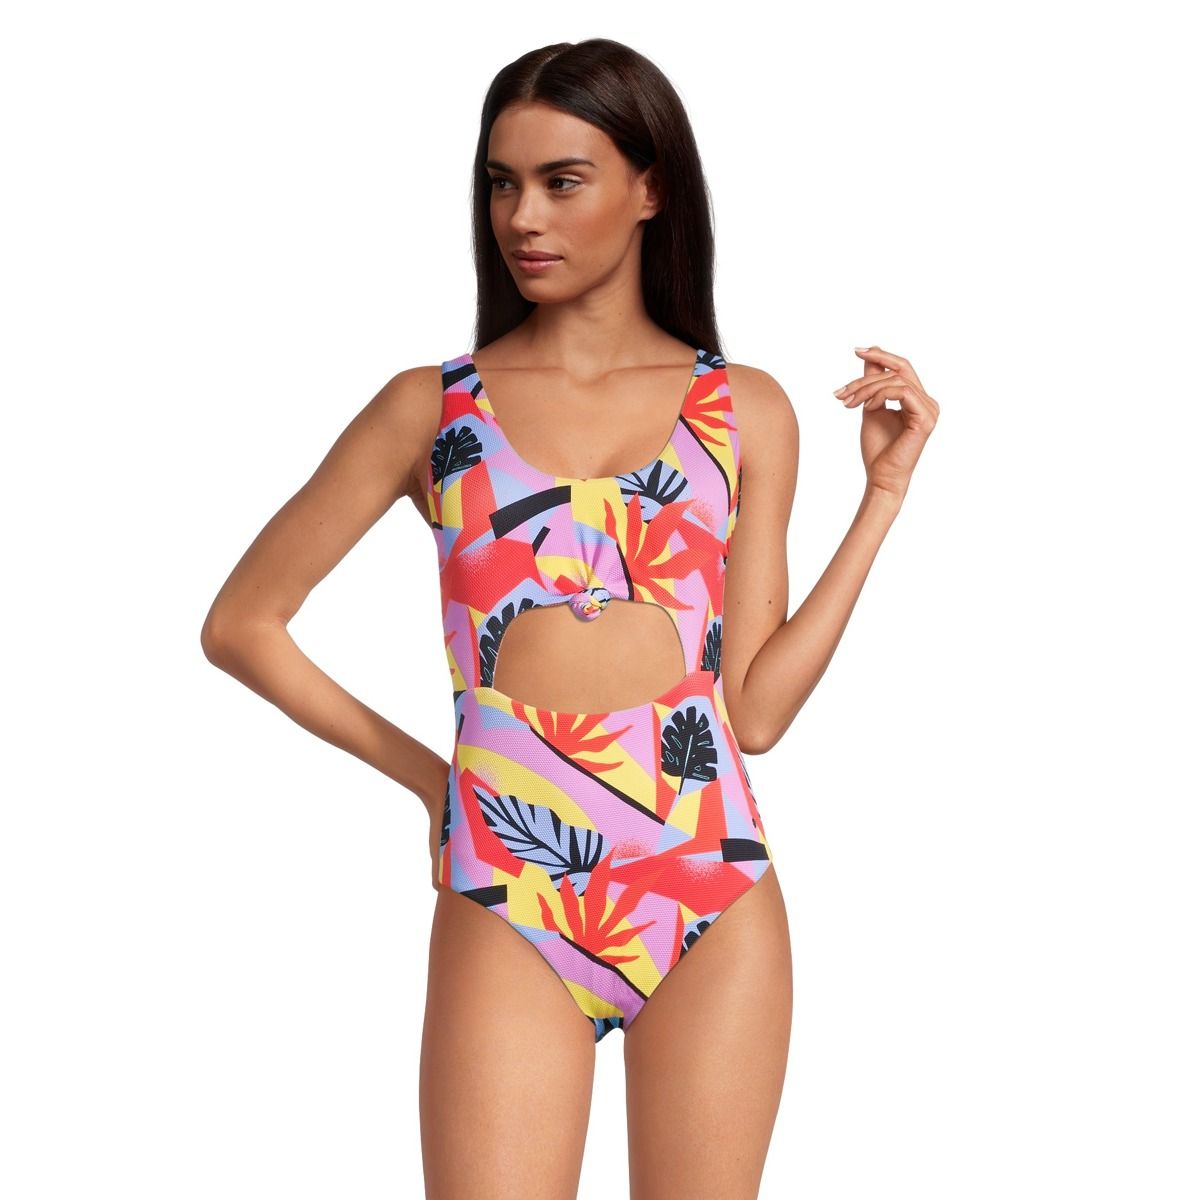 Ripzone Women's SL Cut Out One Piece Swimsuit